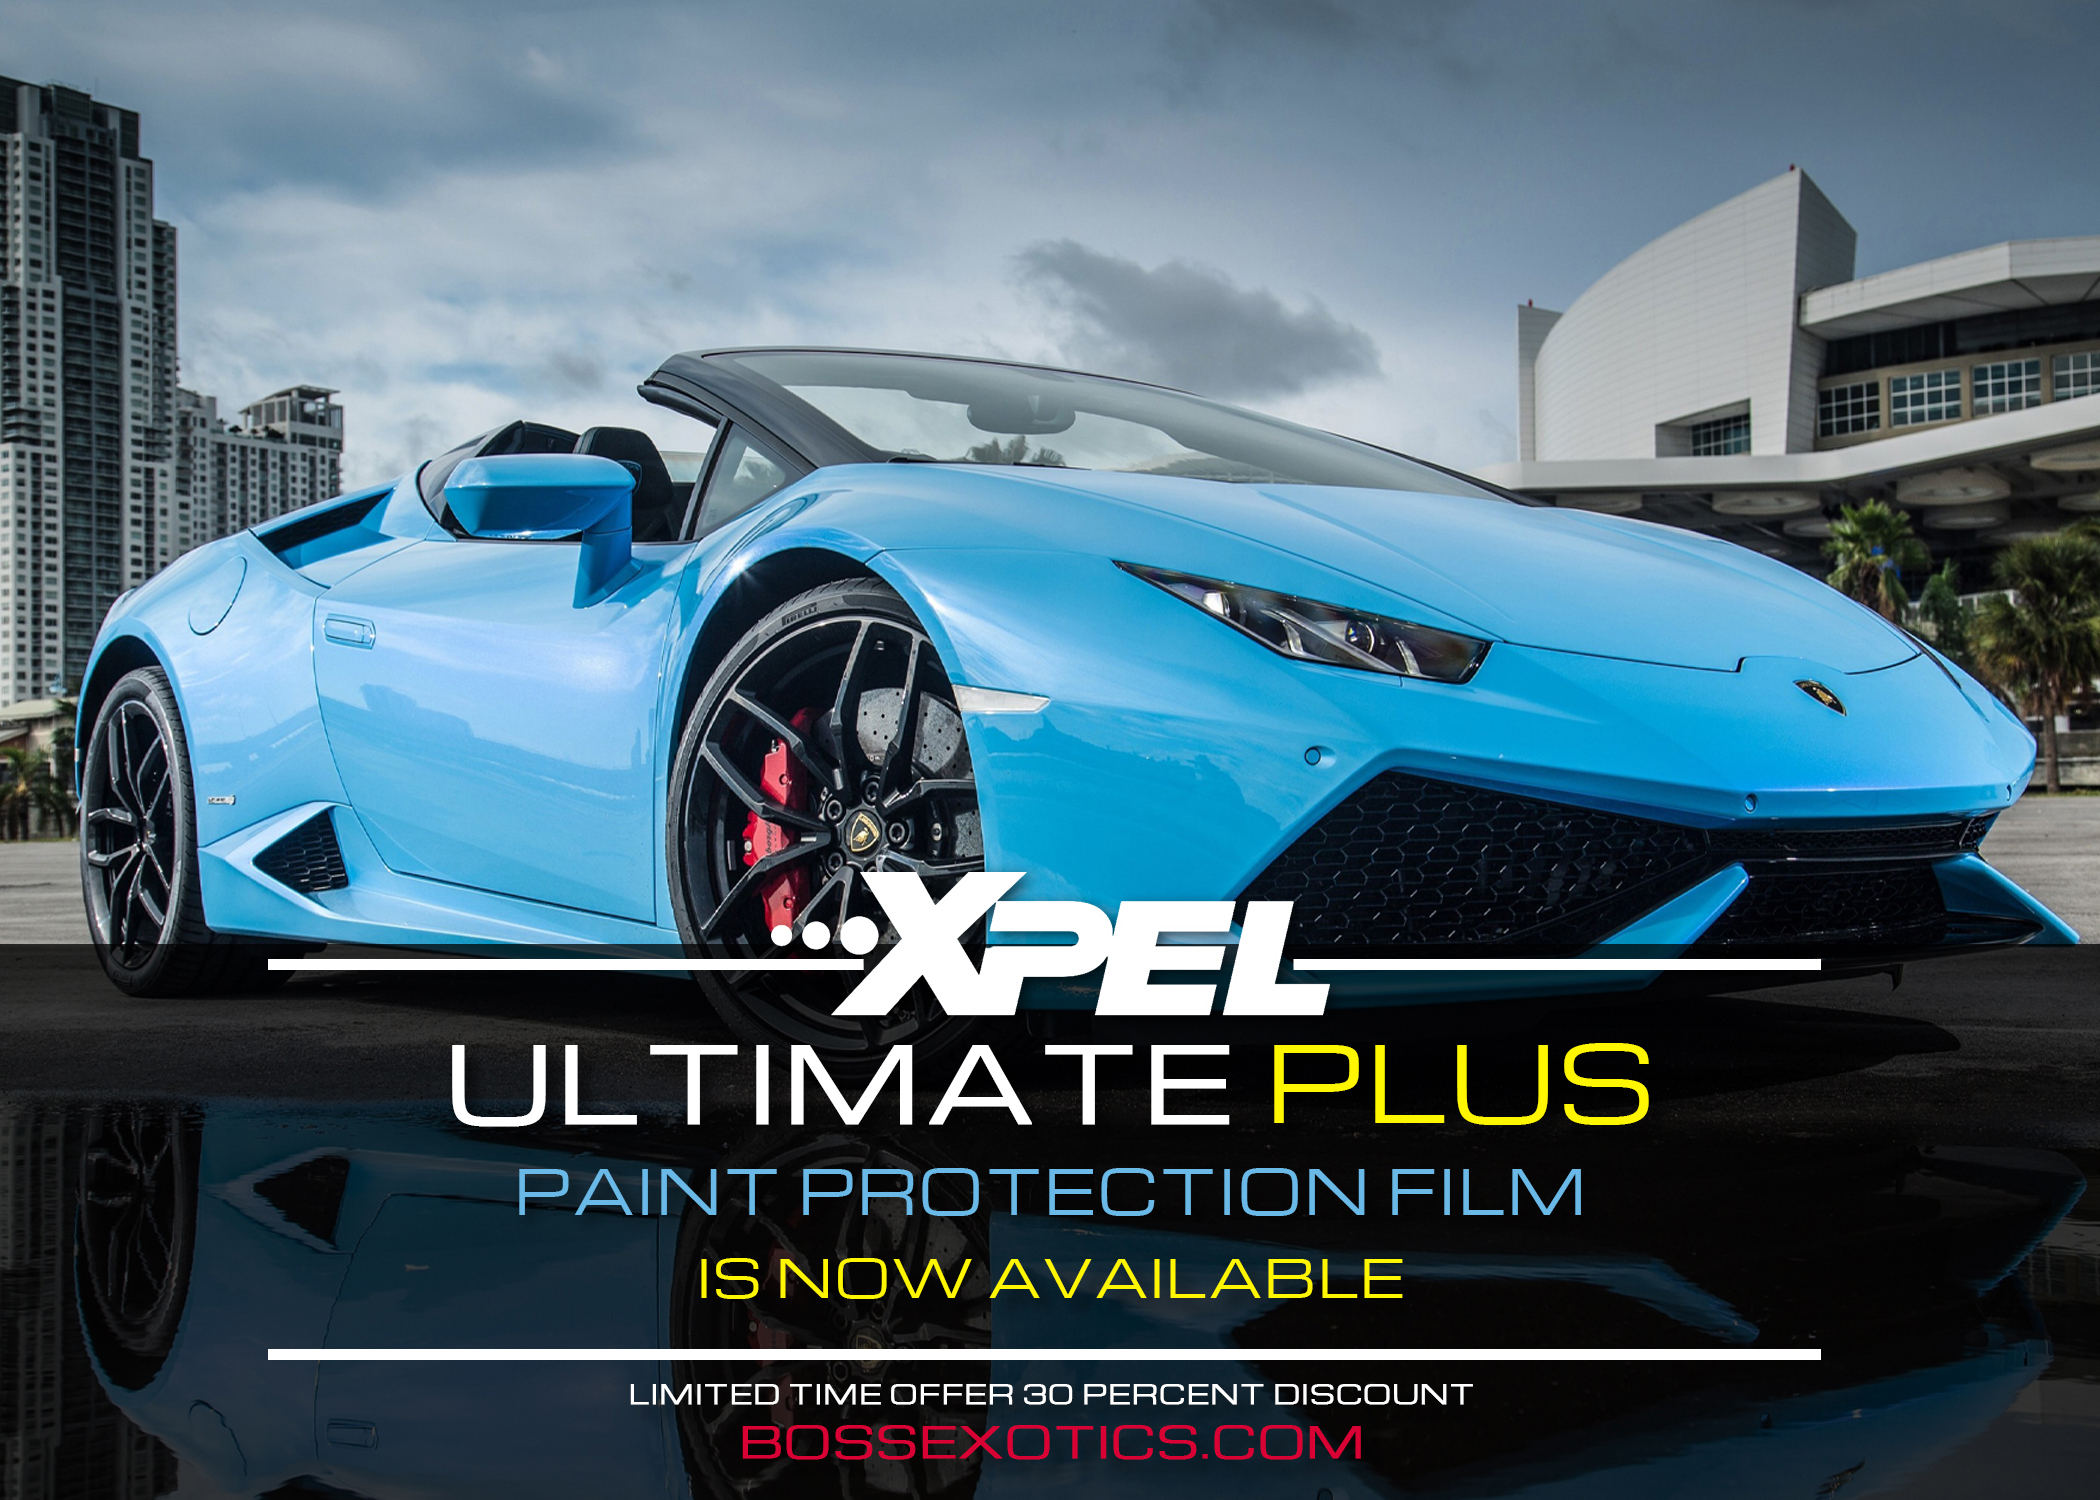 What is XPEL Paint Protection